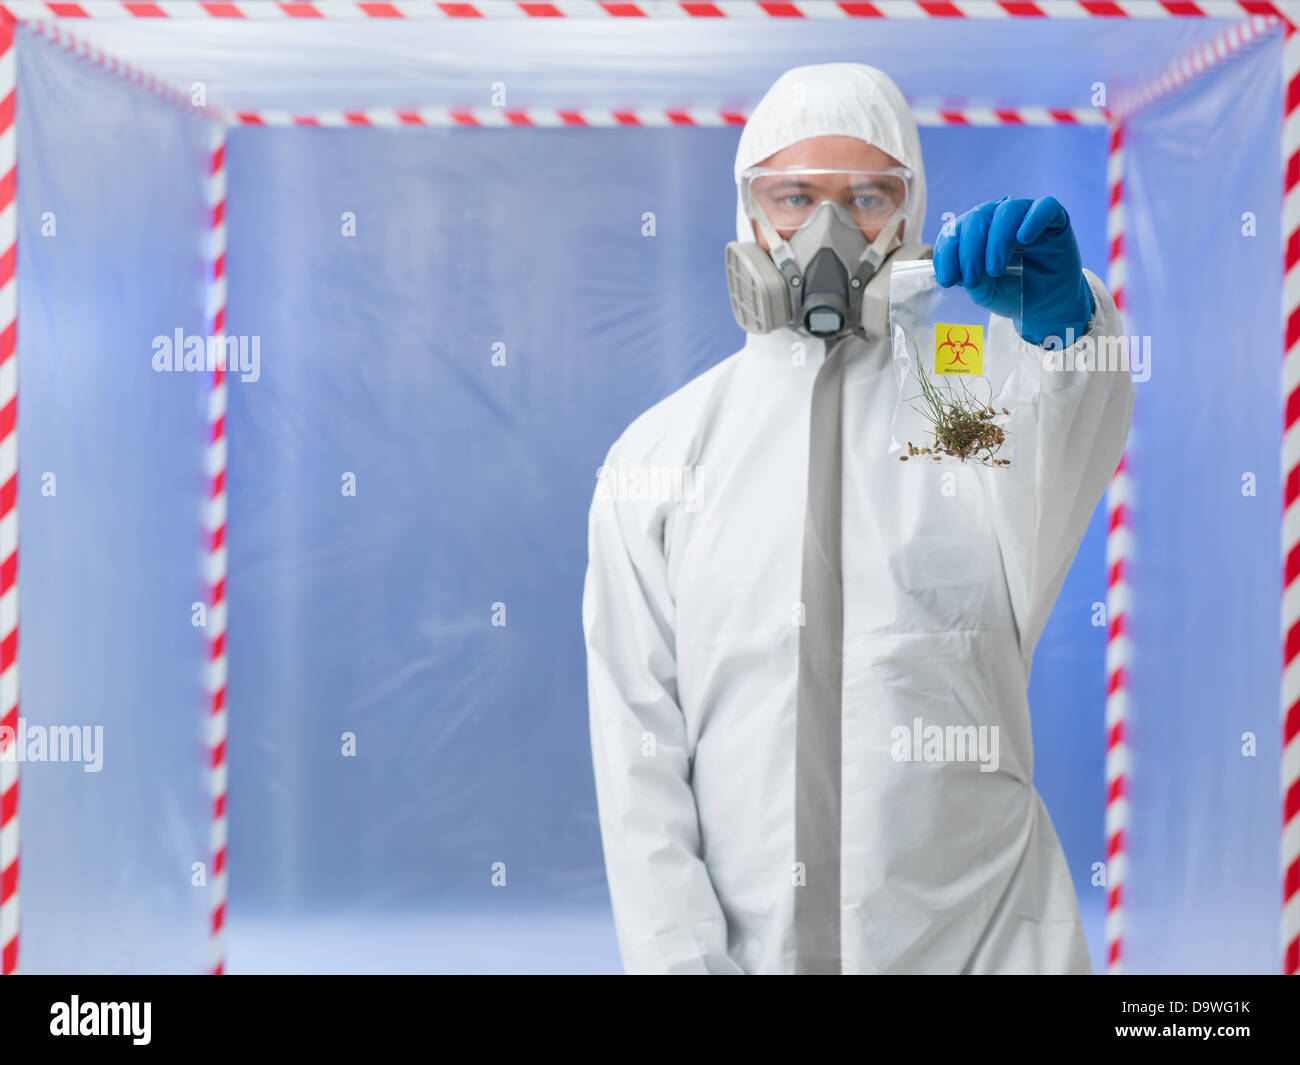 close-up of man wearind protection equipment, holding a plastic bag with germinated seeds, in a chamber surounded with red and white tape Stock Photo